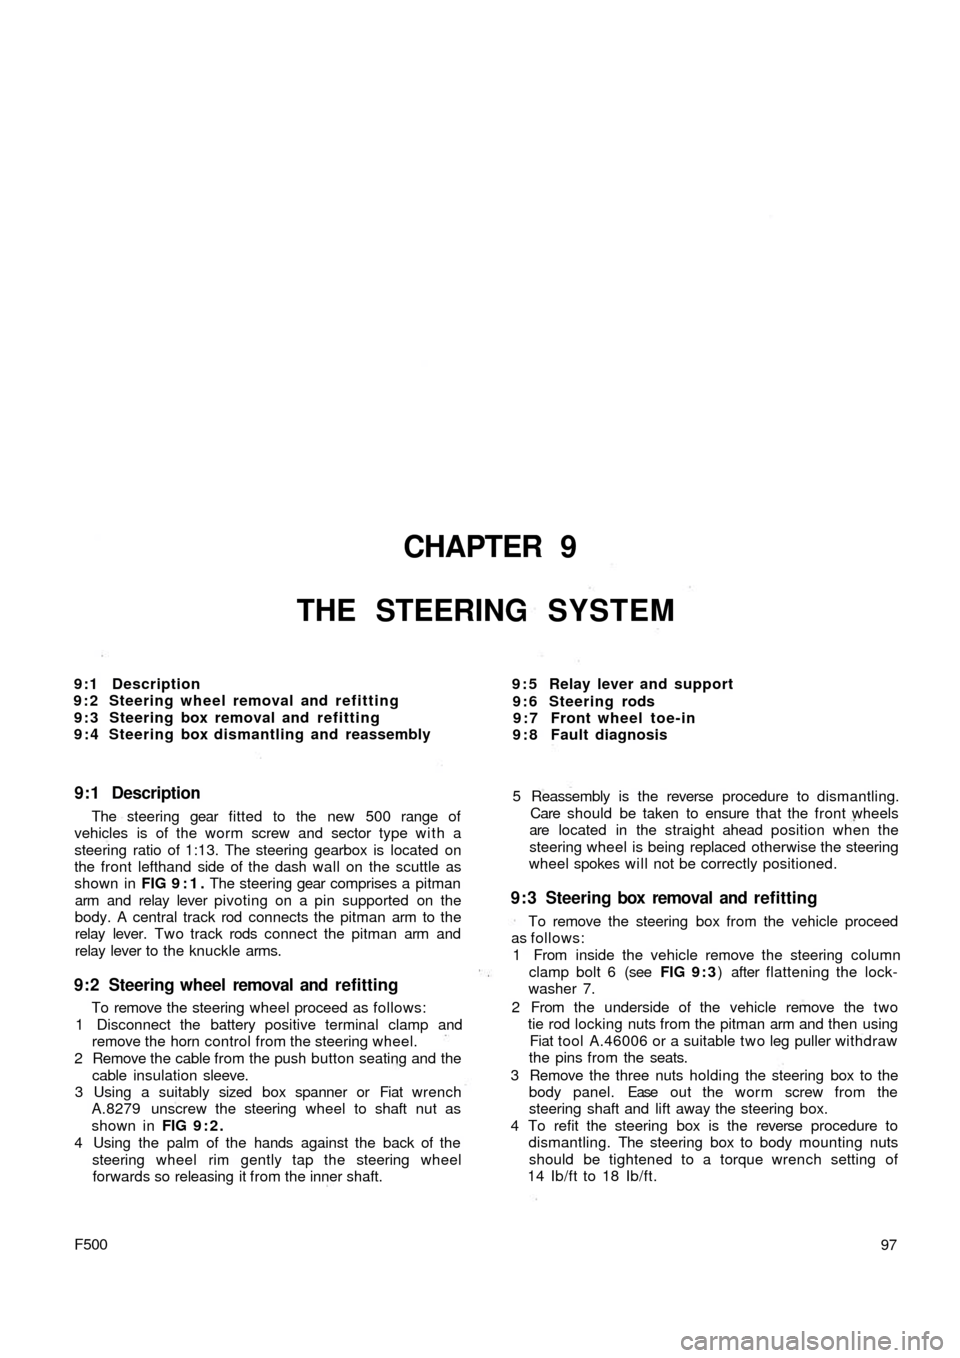 FIAT 500 1966 1.G Workshop Manual CHAPTER 9
THE STEERING SYSTEM
9 : 5 Relay lever and support
9 : 6 Steering rods
9 : 7 Front wheel toe-in
9 : 8 Fault diagnosis 9:1 Description
9 : 2 Steering wheel removal and refitting
9 : 3 Steering